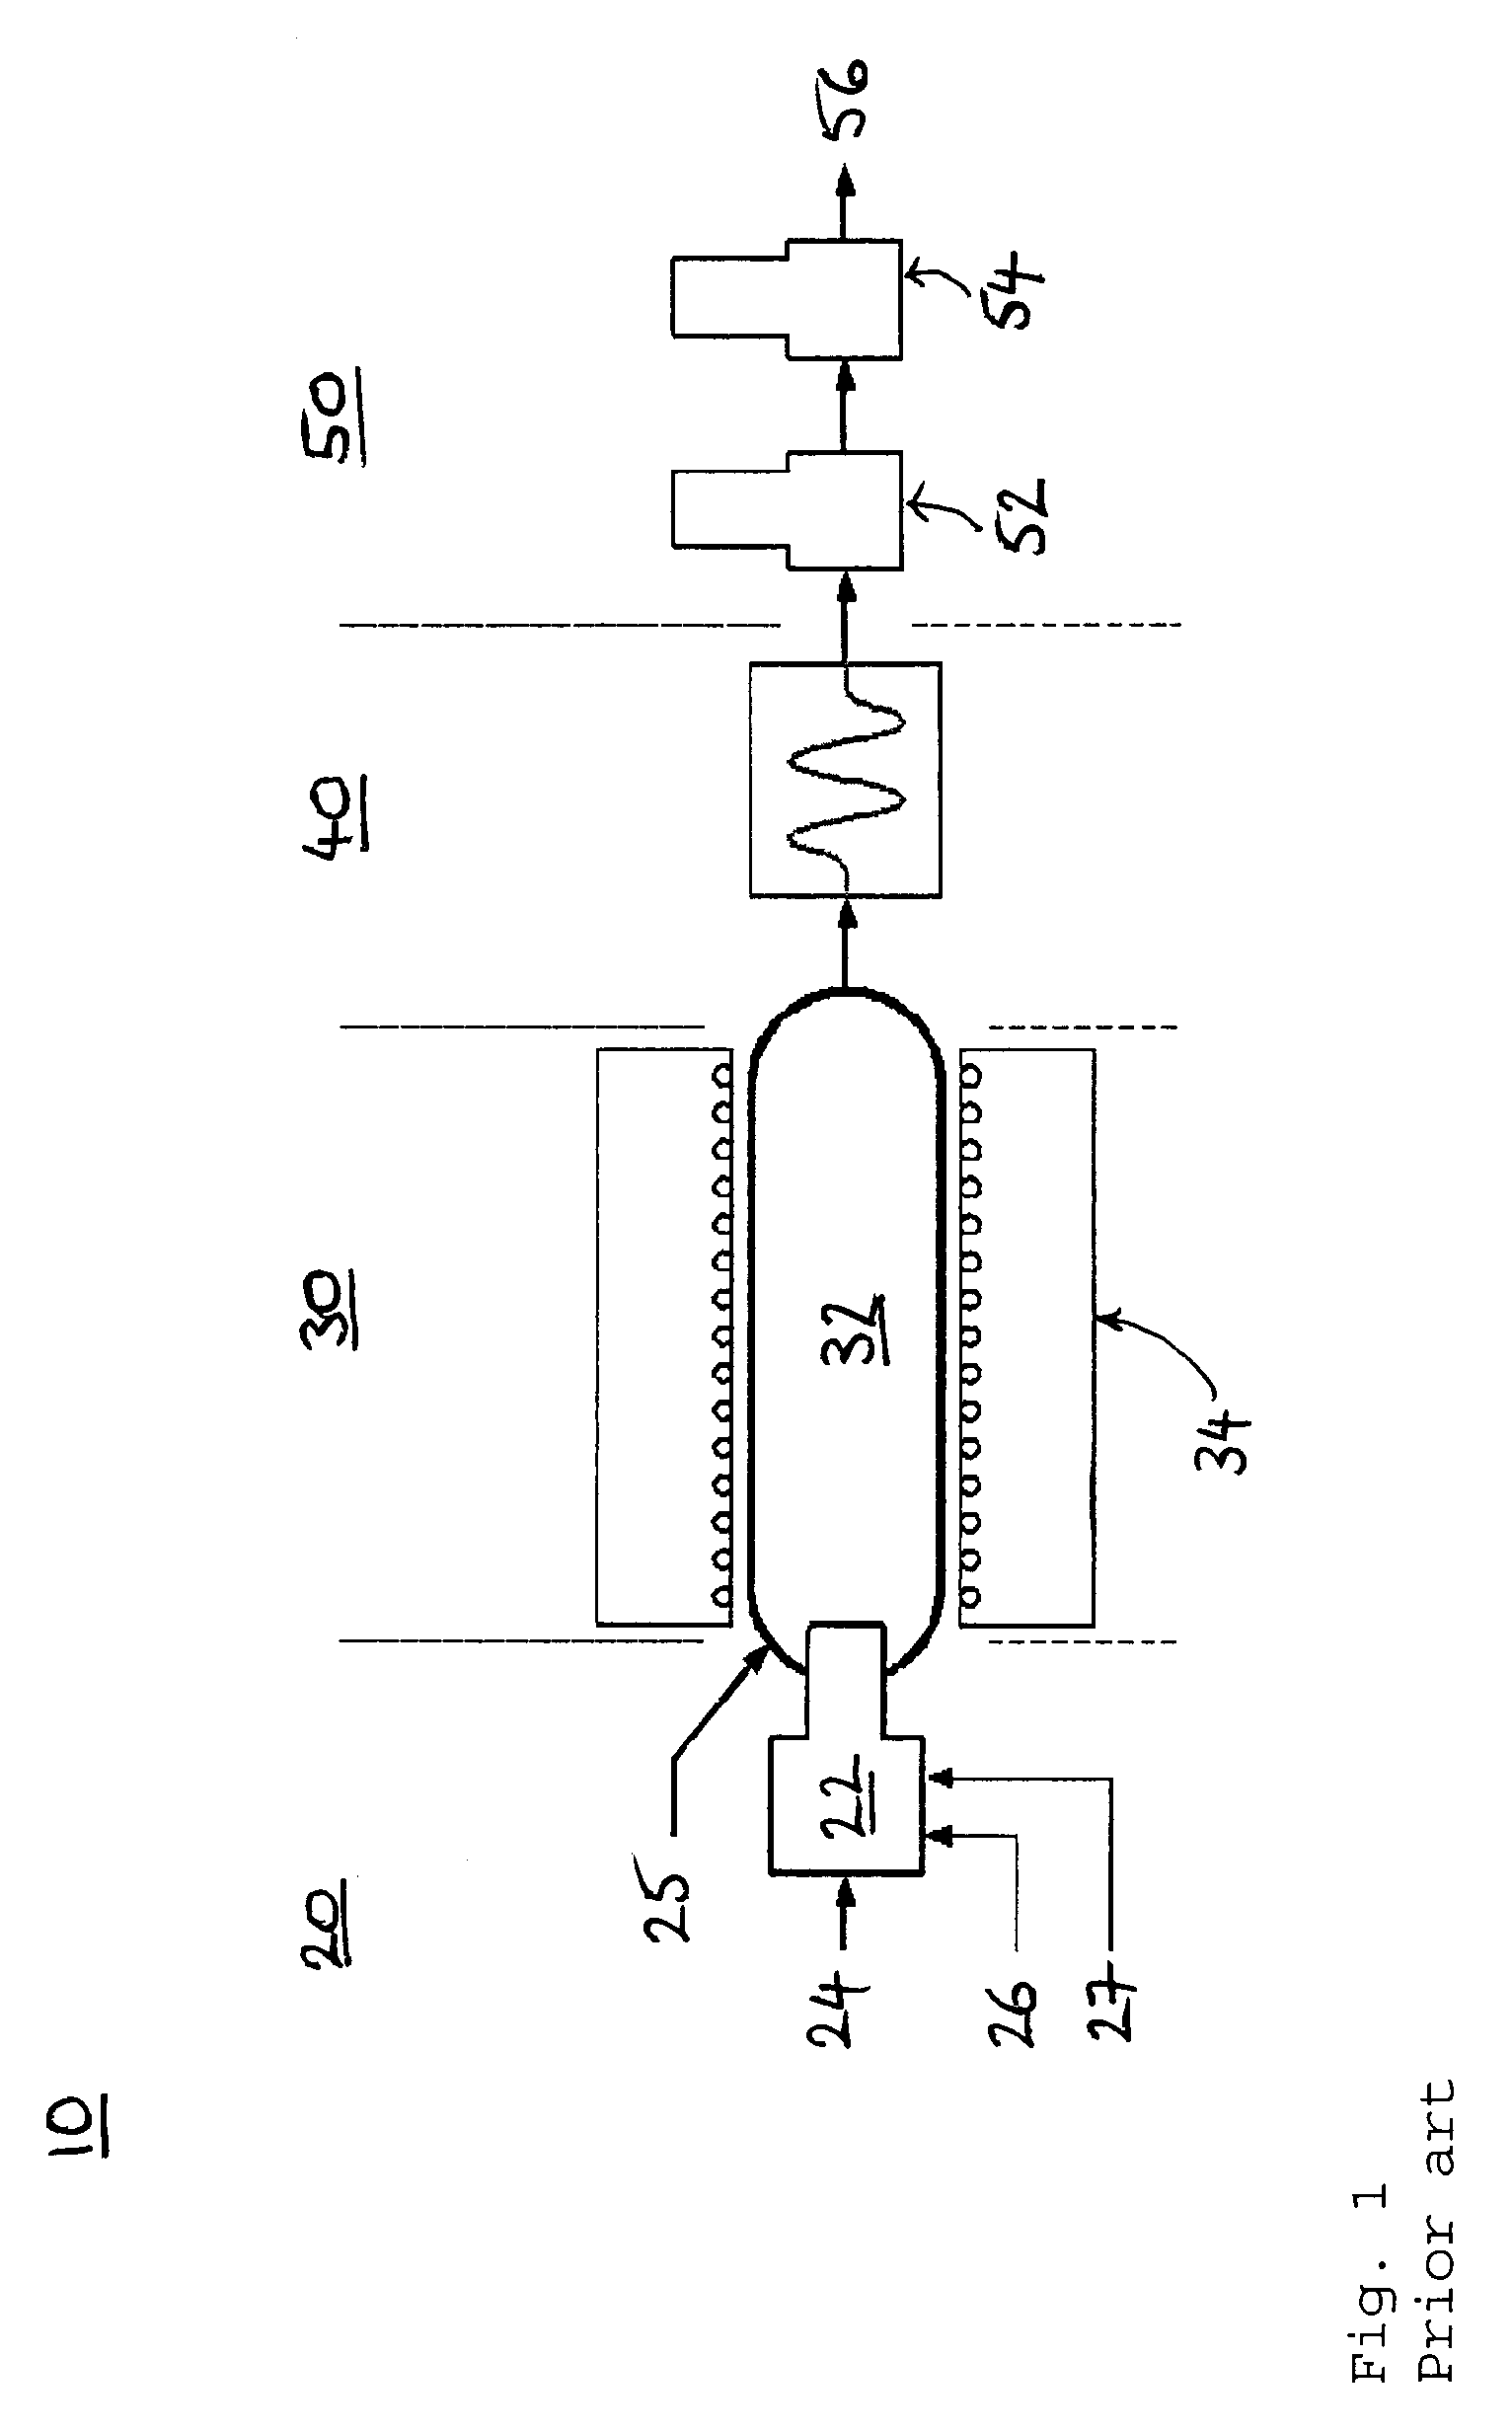 Apparatus and method for generating nitrogen oxides